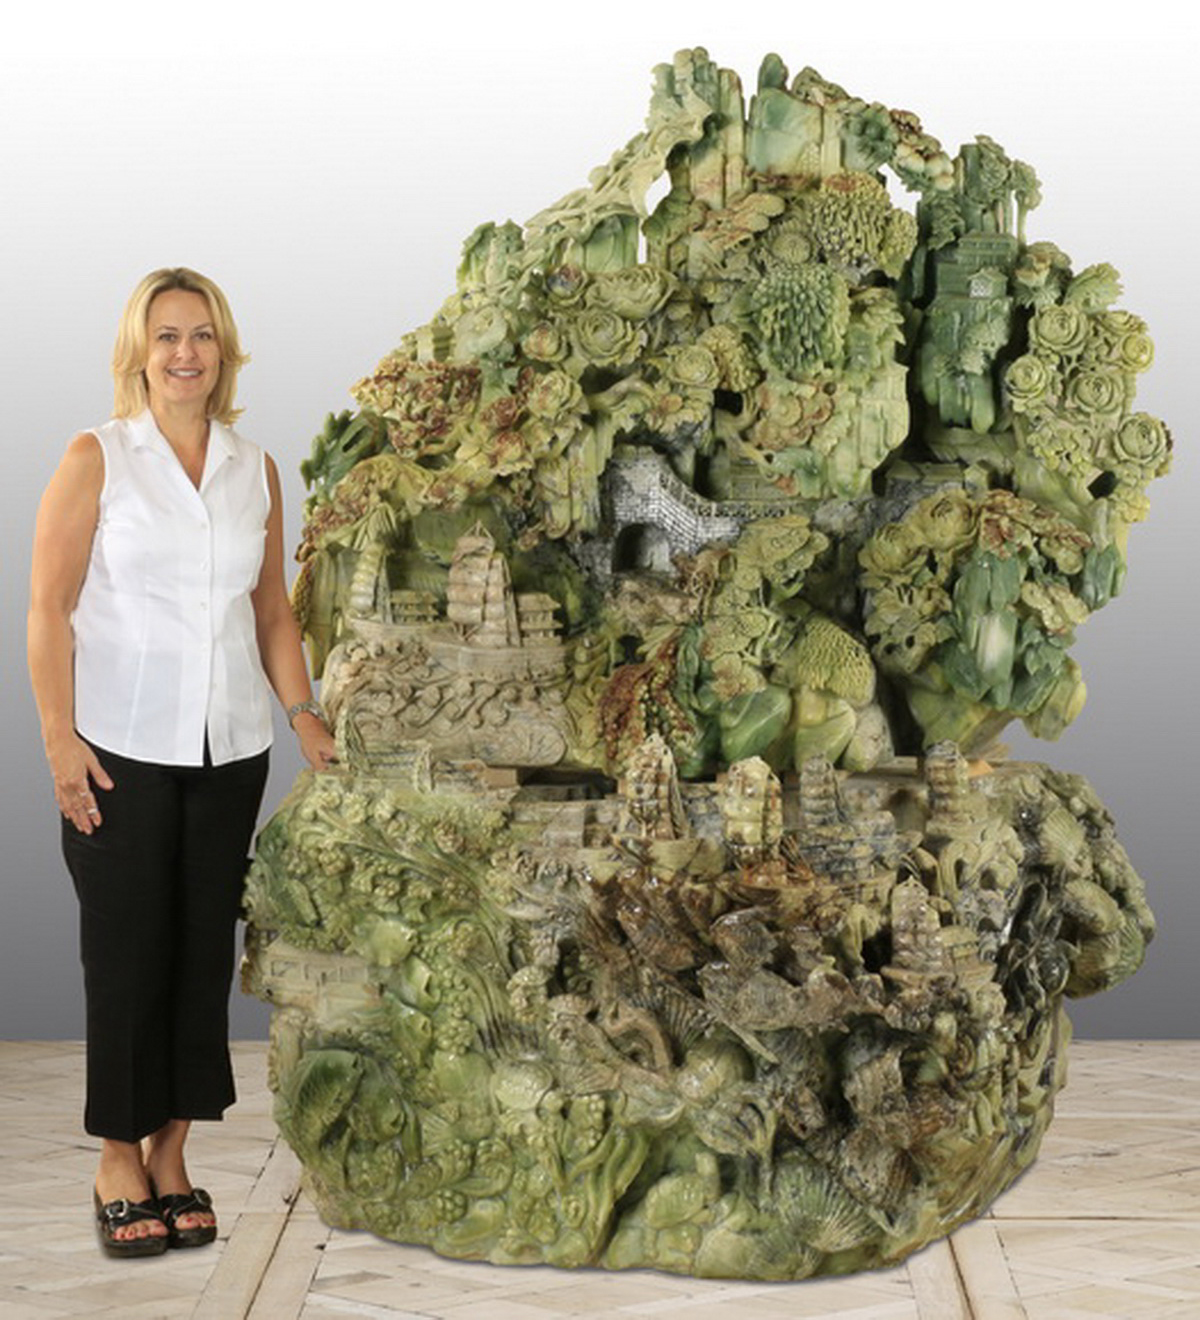 Great Gatsby's to auction gigantic Chinese stone carvings Aug. 29-30